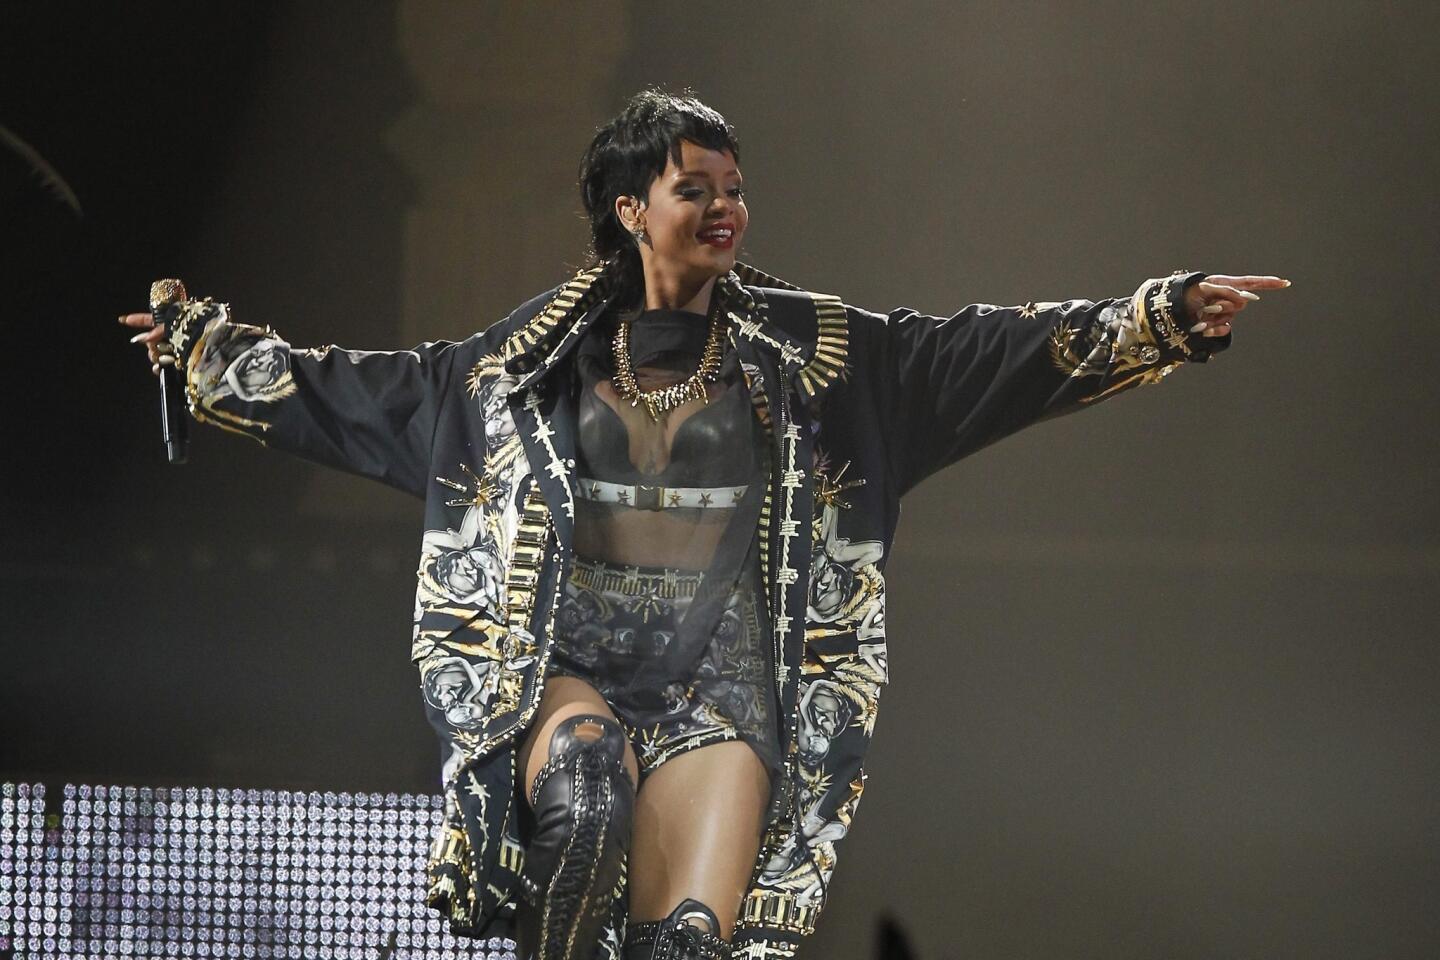 Rihanna's Instagram post leads to two arrests